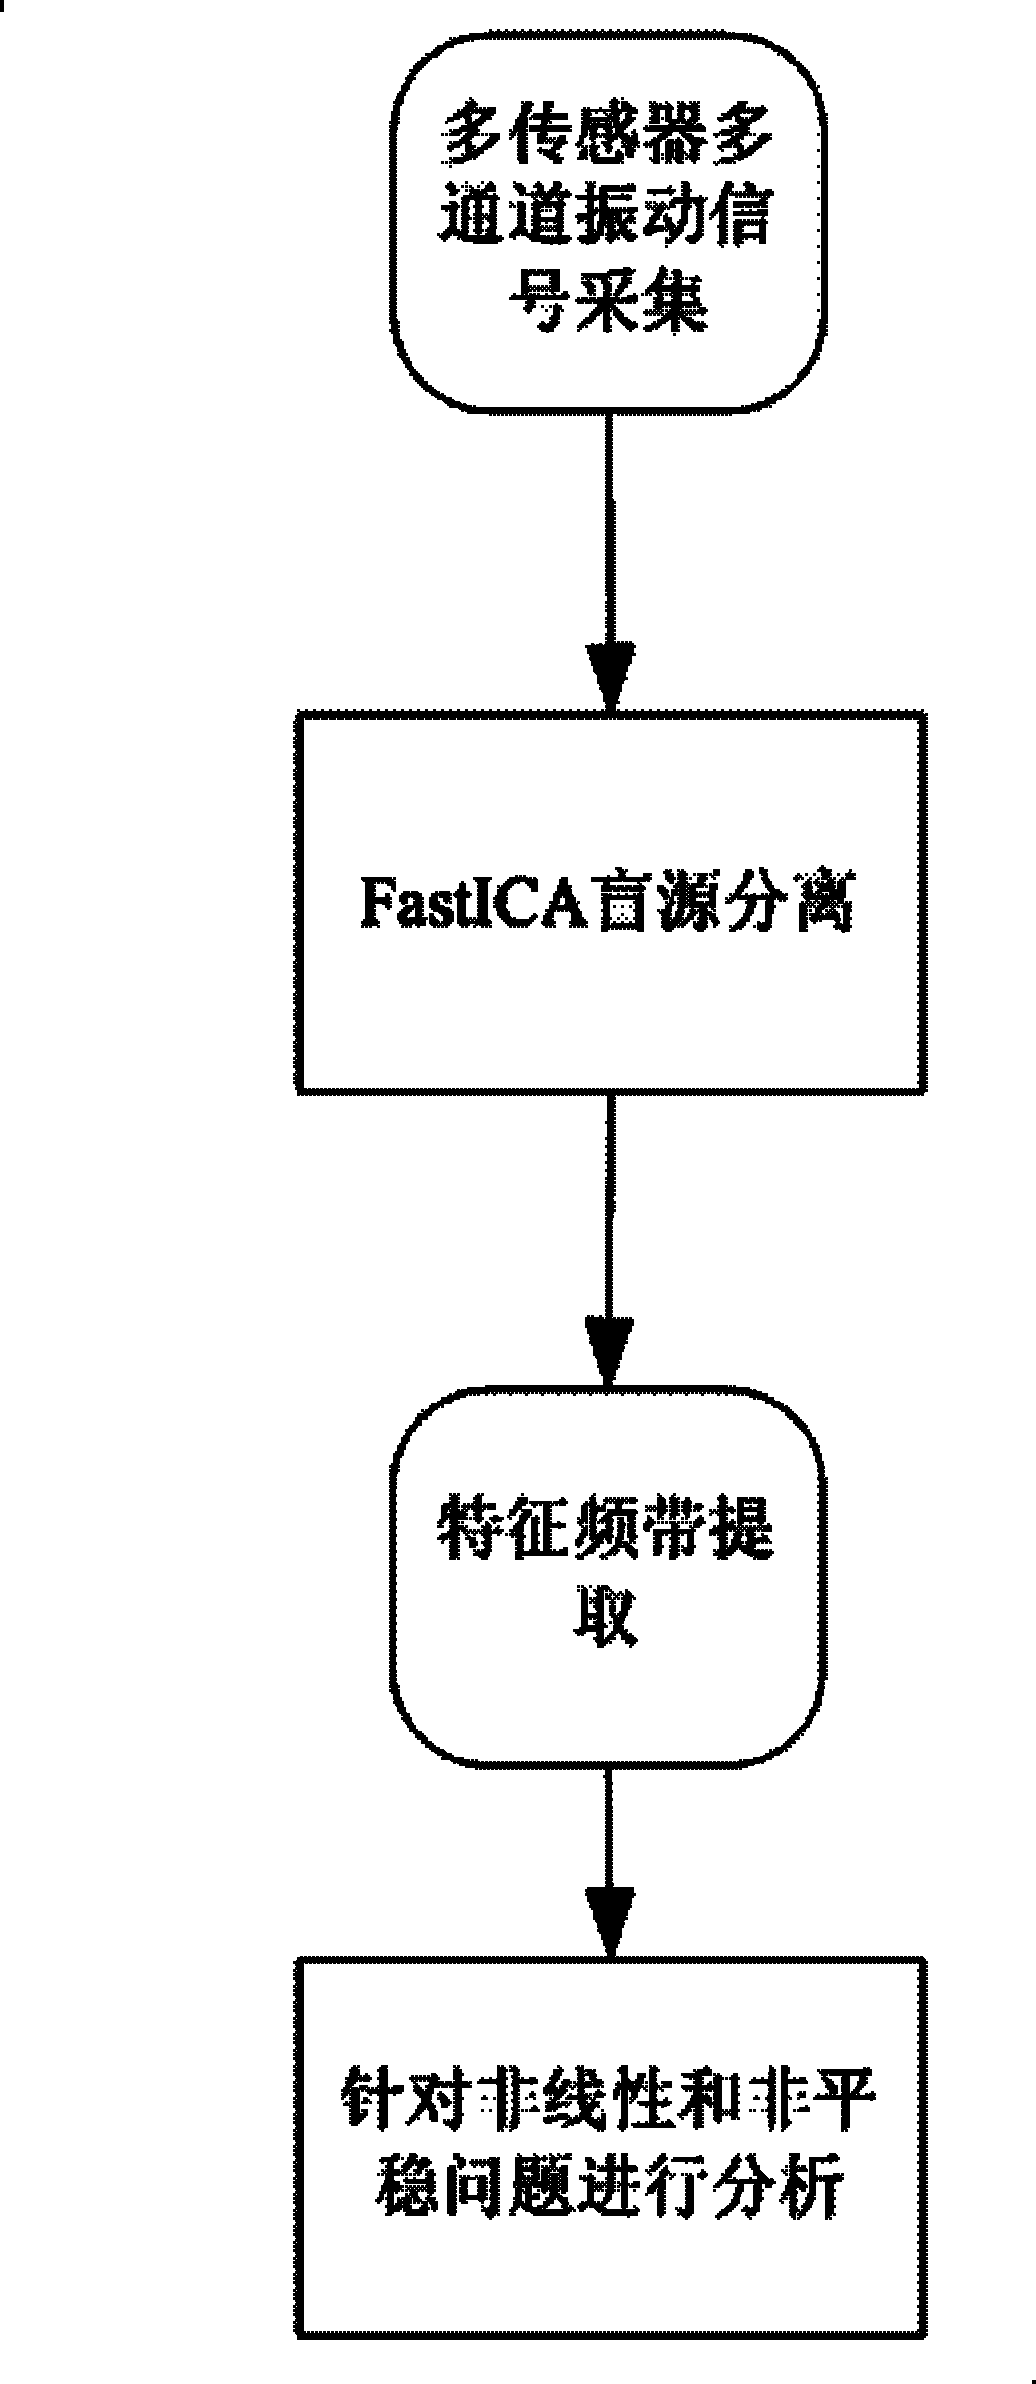 Characteristic extracting method for prediction of rotating mechanical failure trend